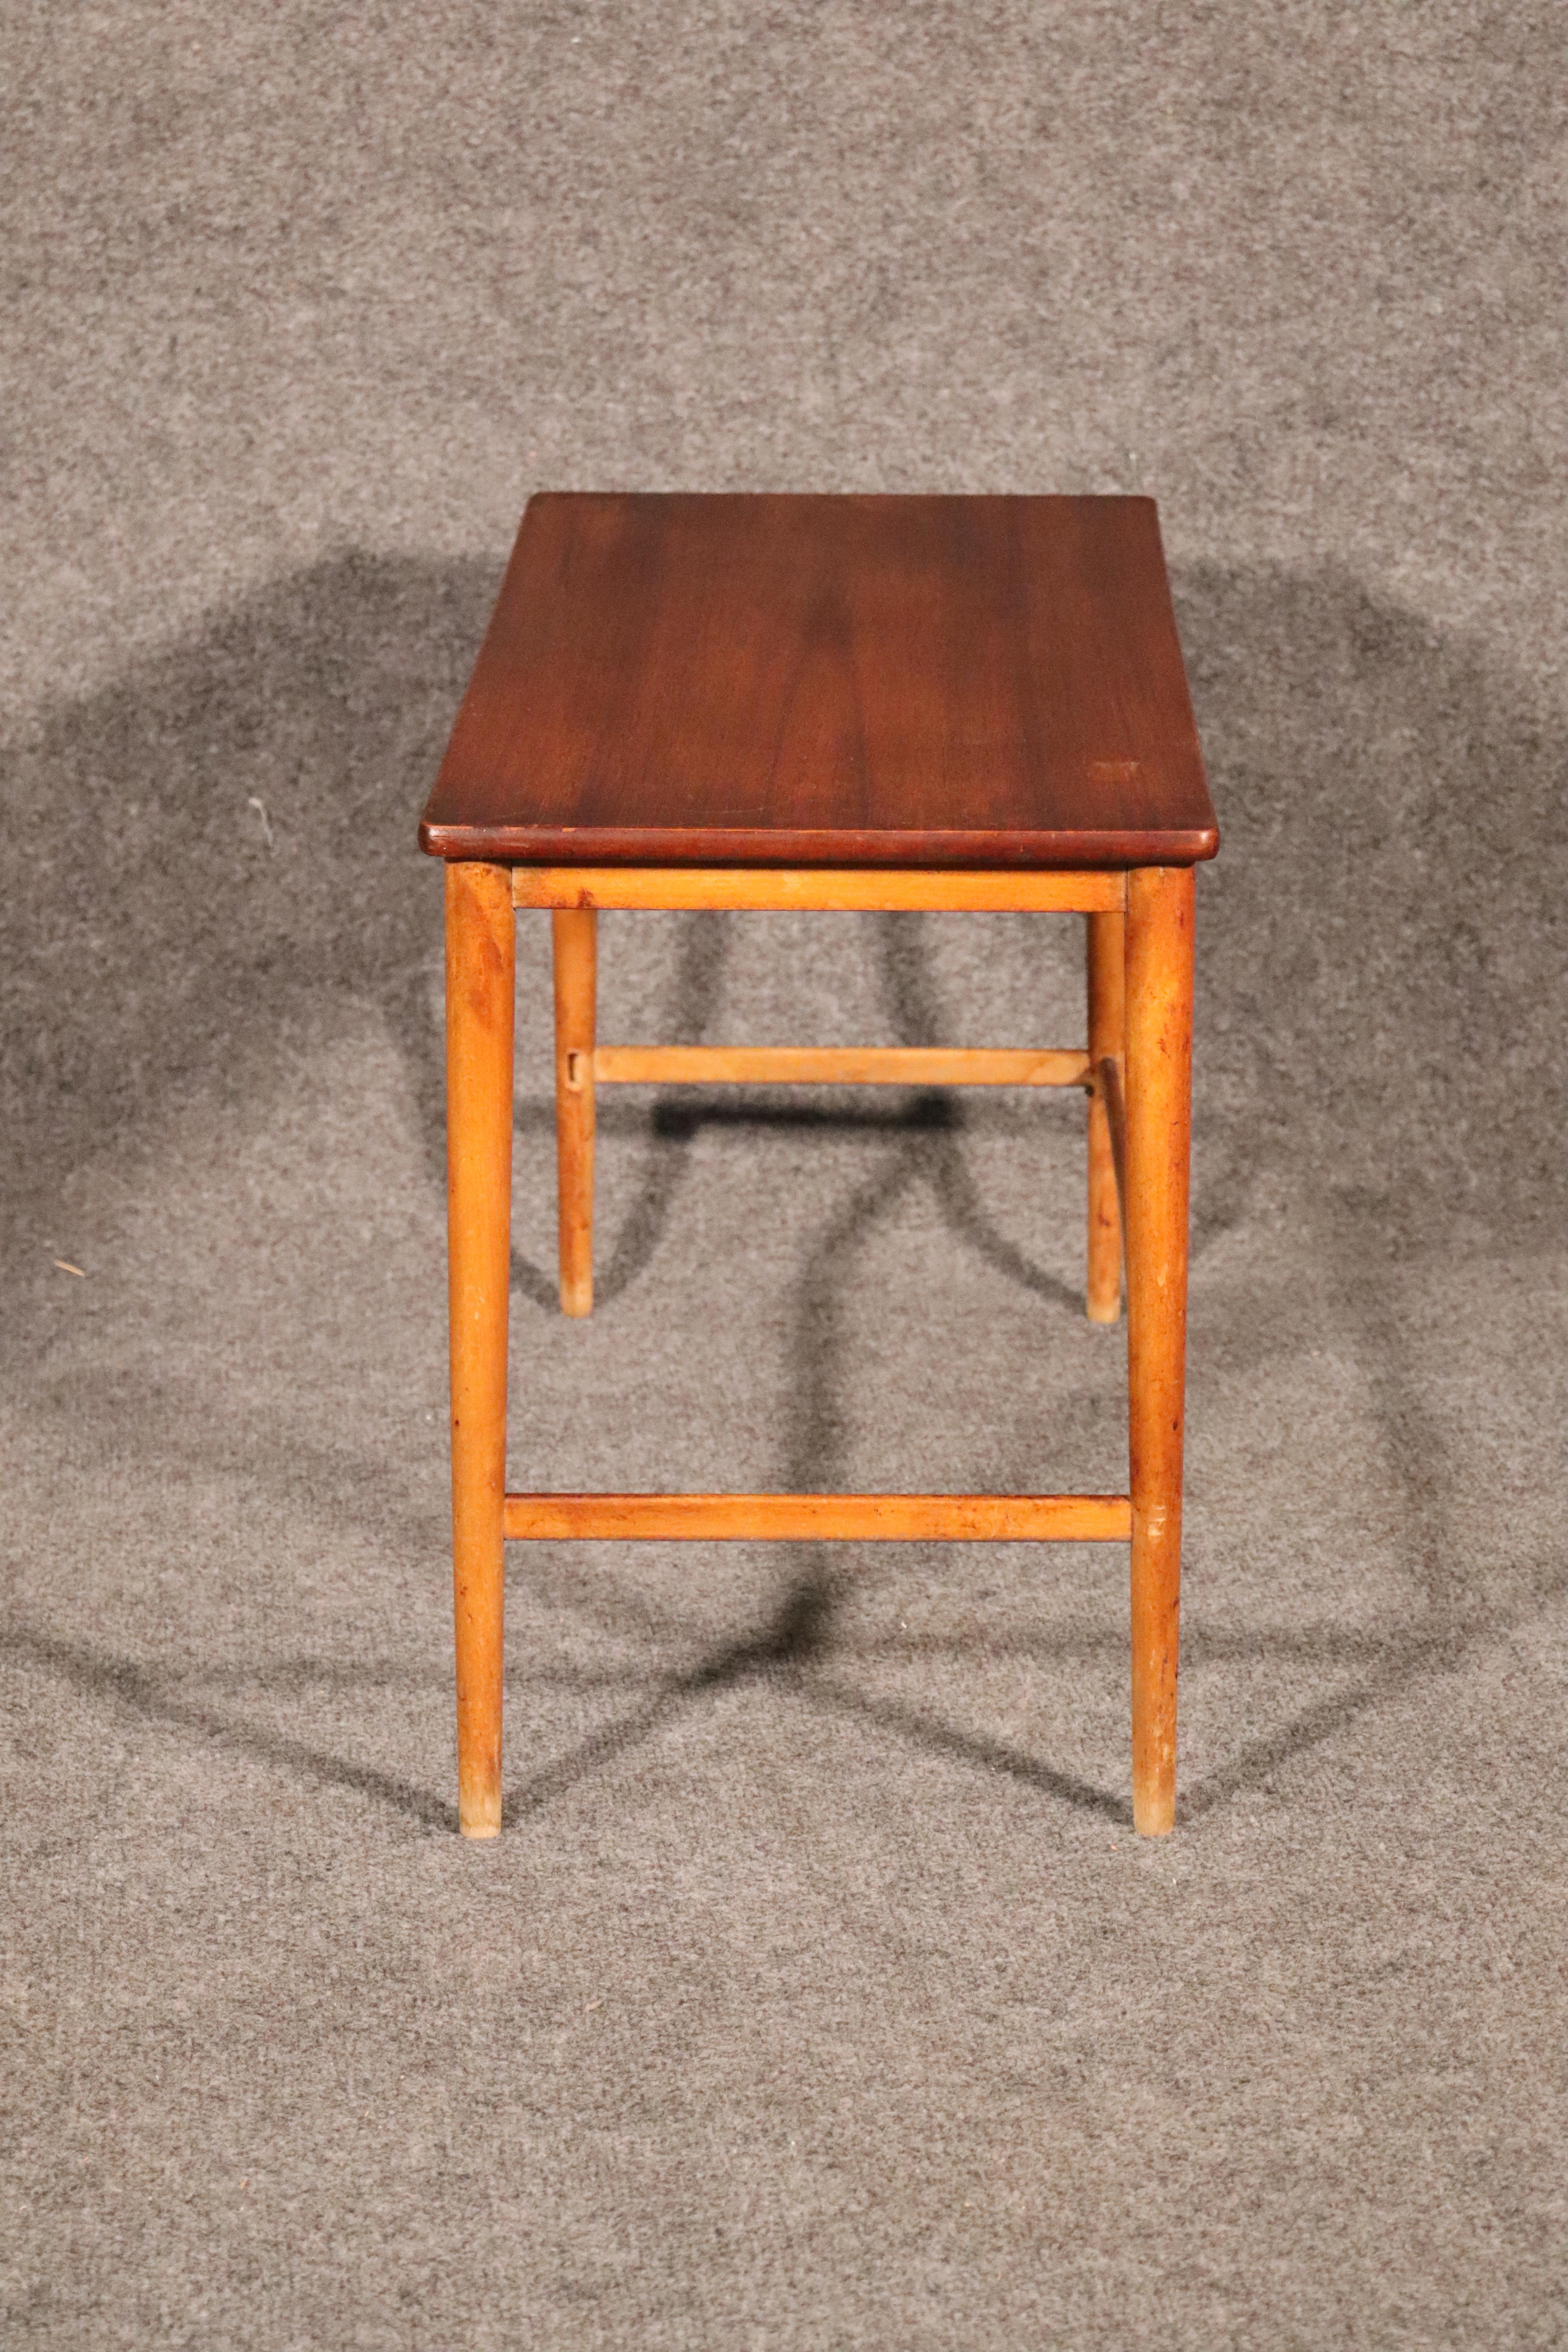 Vintage Teak End Table In Good Condition For Sale In Brooklyn, NY